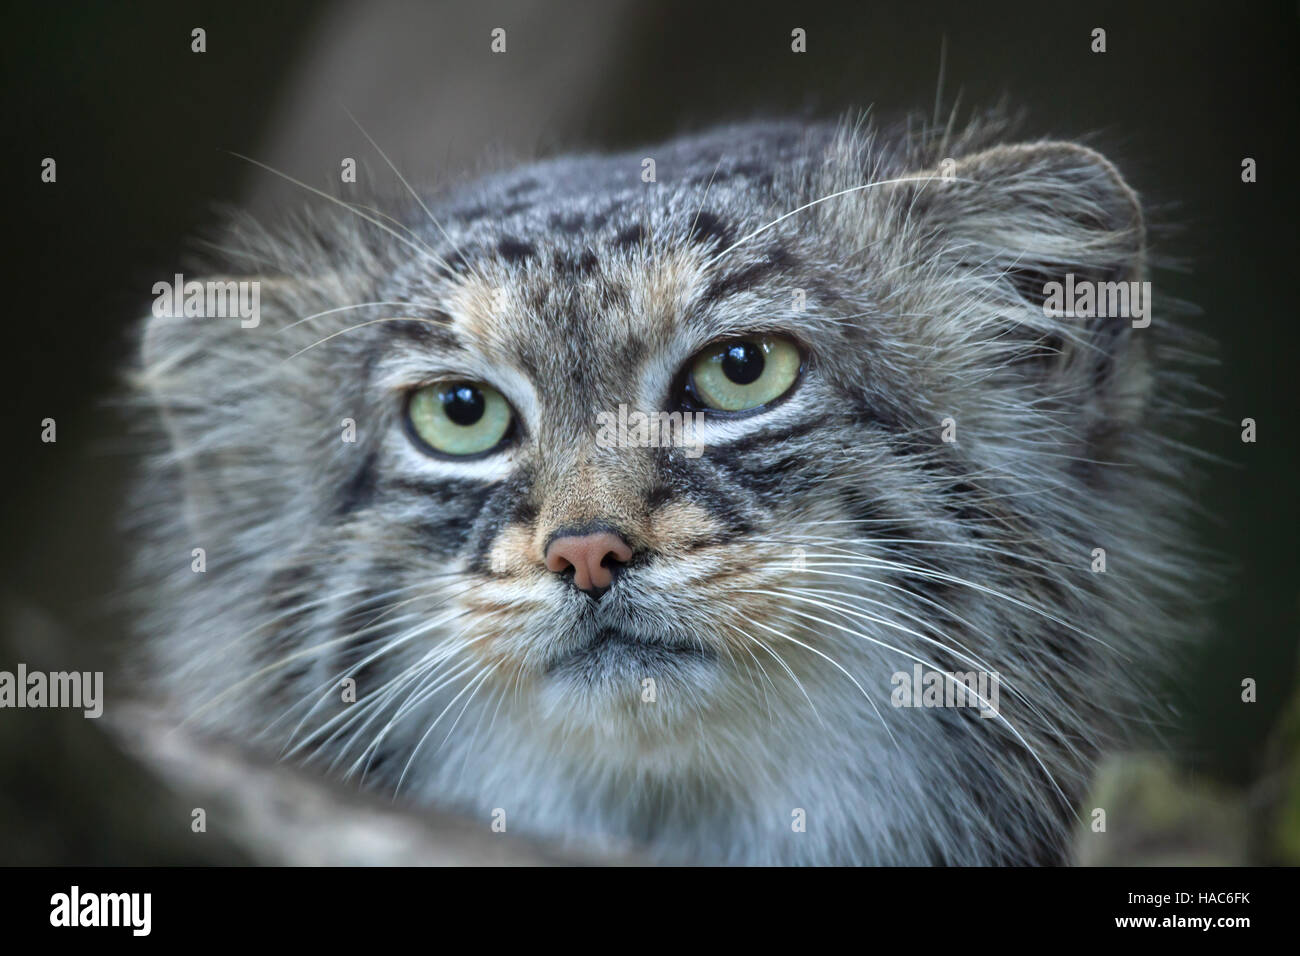 Pallas's cat (Otocolobus manul), also known as the manul. Stock Photo